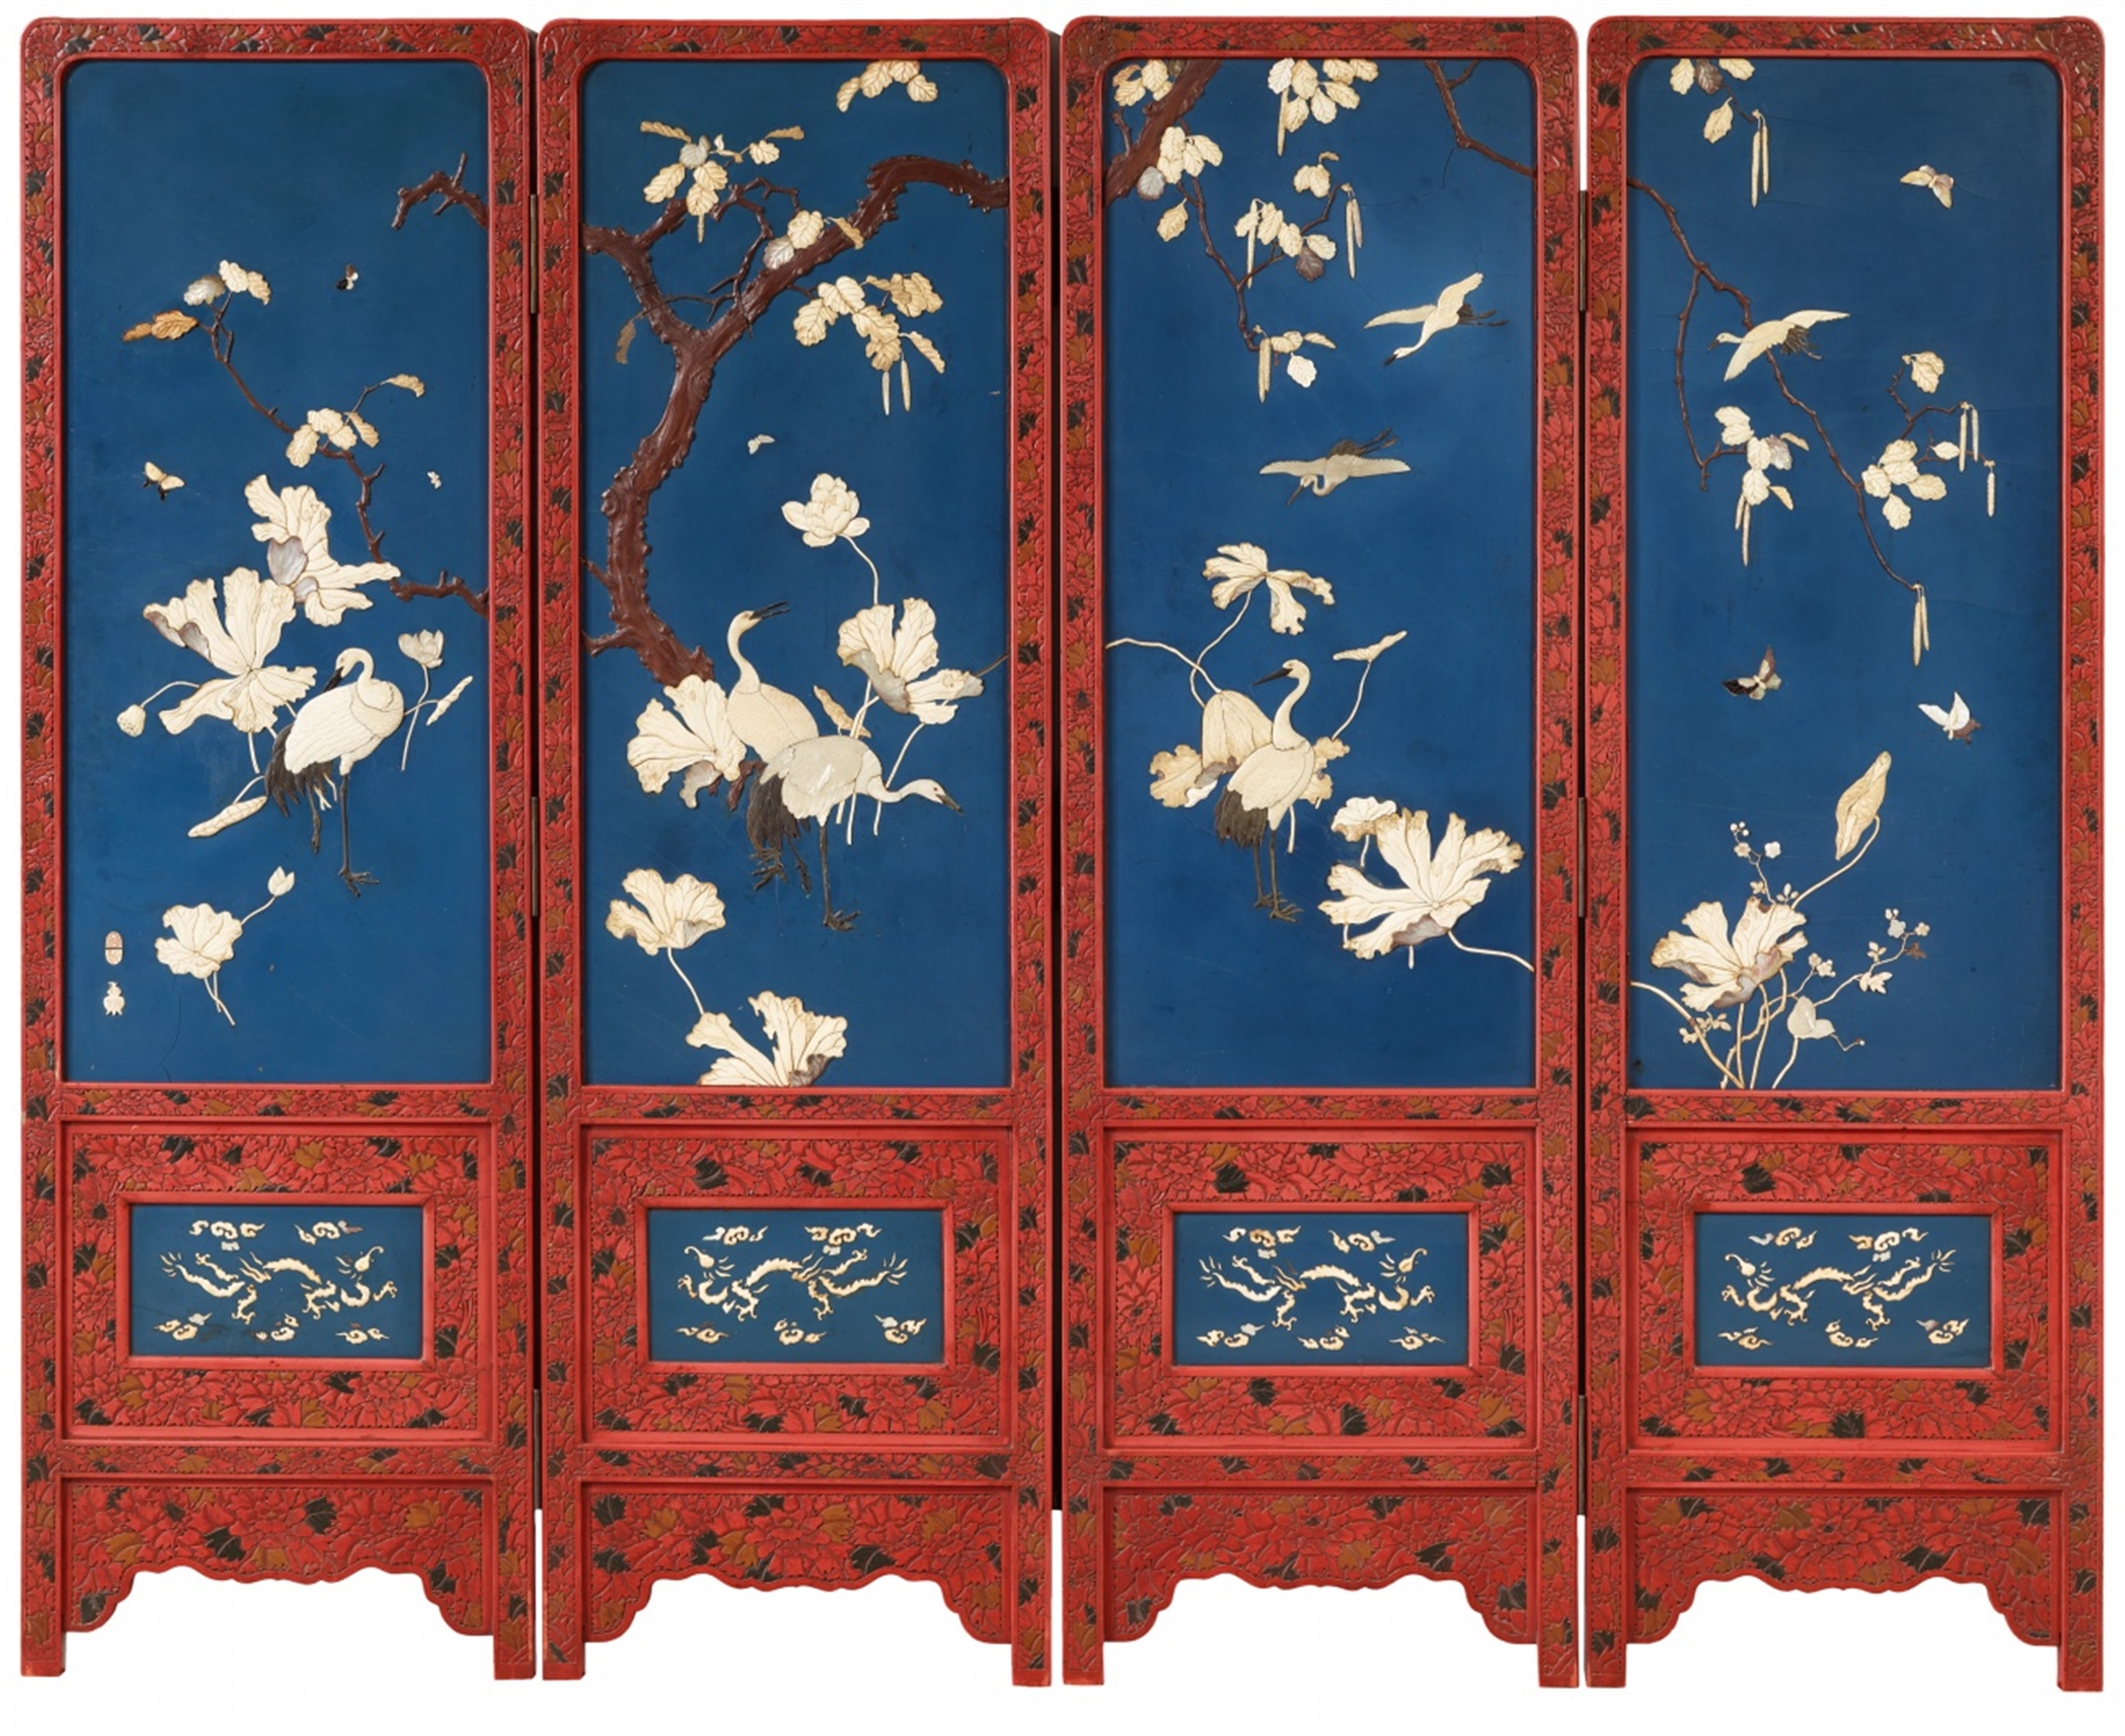 A four-panel inlaid lacquer screen. Late 19th century